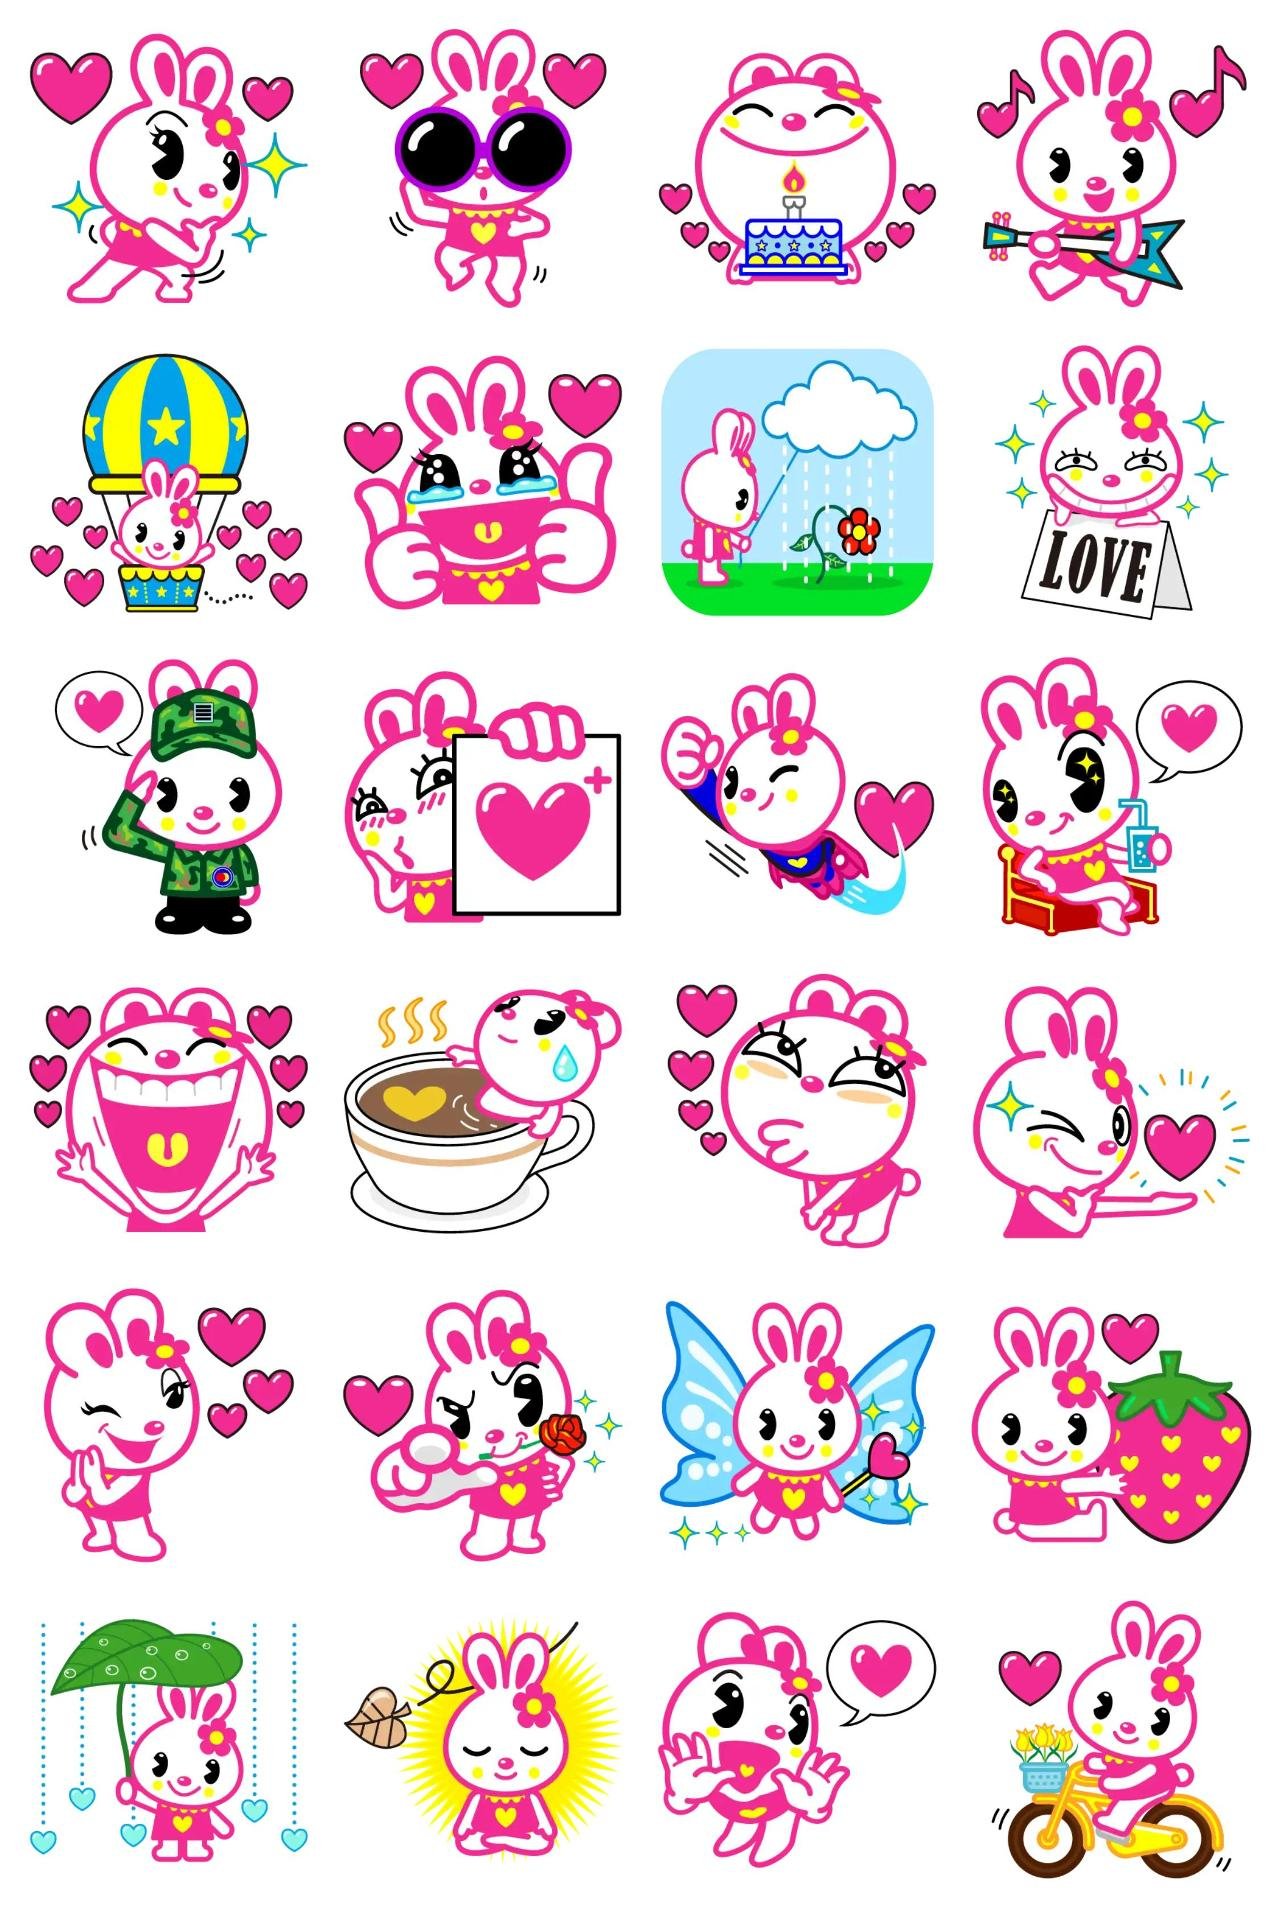 Positive Rabbit Hipani 3 Animals sticker pack for Whatsapp, Telegram, Signal, and others chatting and message apps